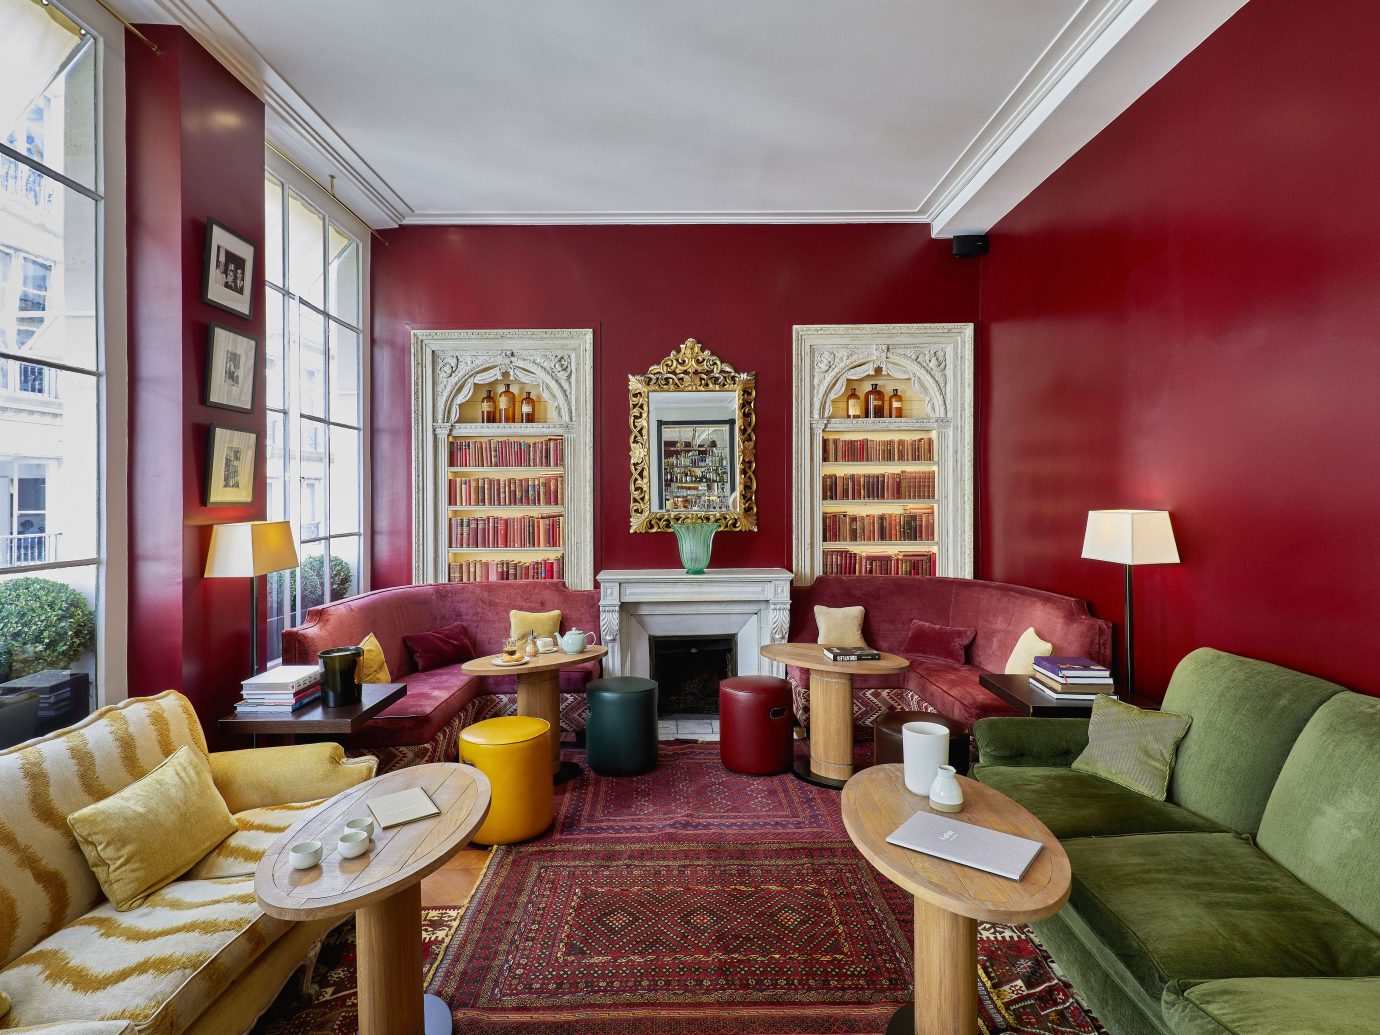 interior sitting space with red walls and carpet but with numerous colorful couches